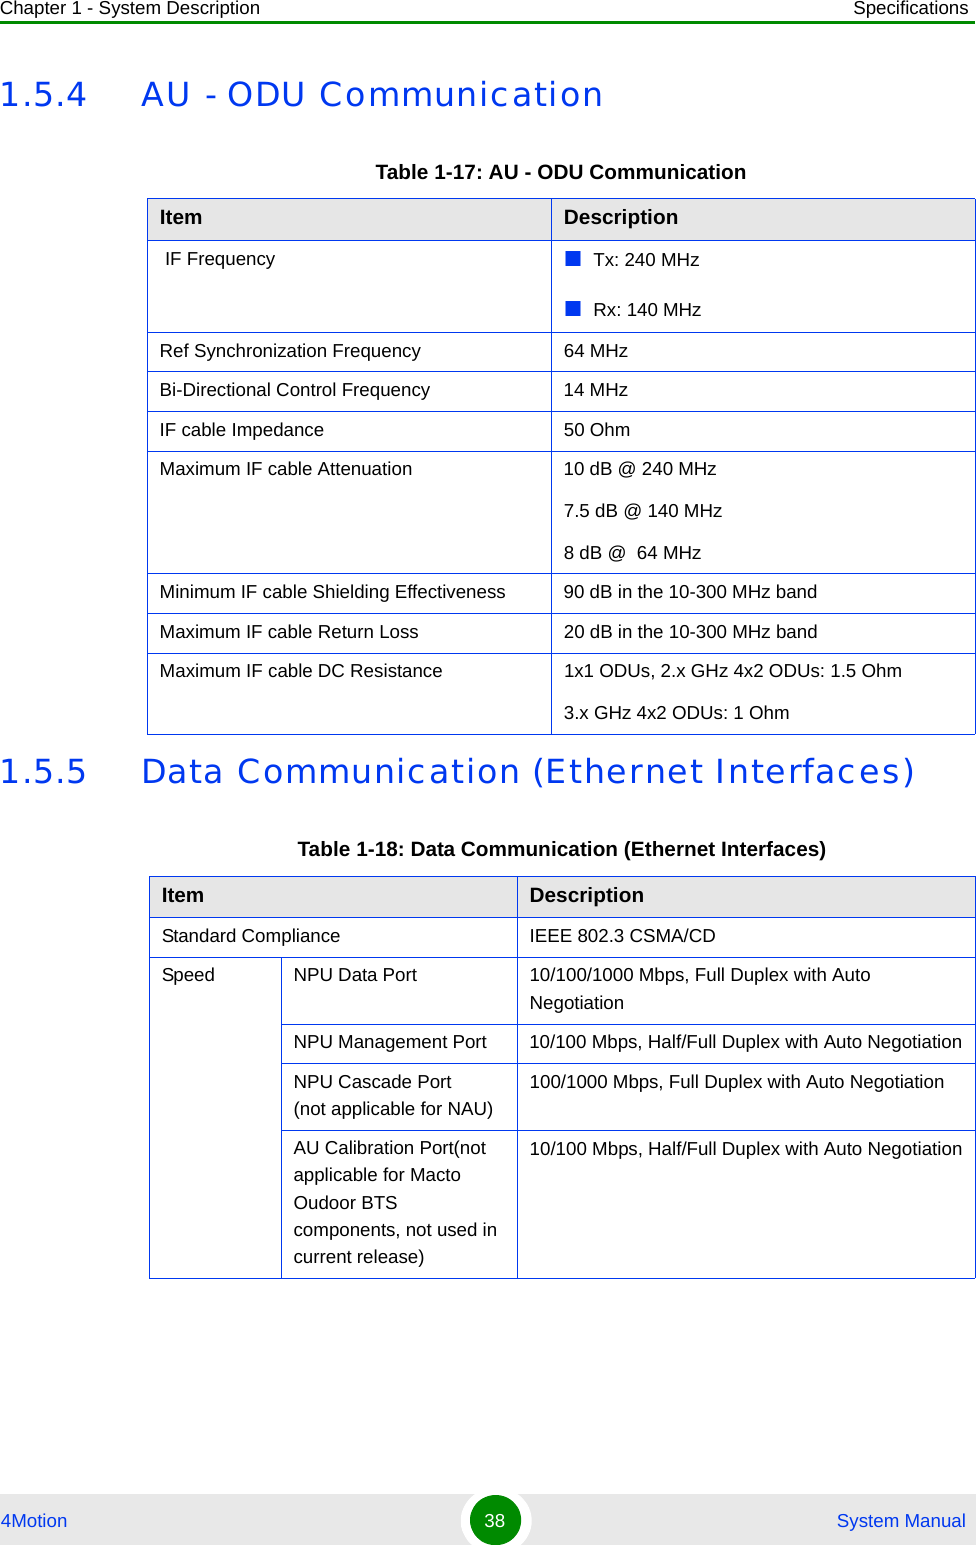 Chapter 1 - System Description Specifications4Motion 38  System Manual1.5.4 AU - ODU Communication1.5.5 Data Communication (Ethernet Interfaces)Table 1-17: AU - ODU CommunicationItem Description IF Frequency Tx: 240 MHzRx: 140 MHzRef Synchronization Frequency 64 MHzBi-Directional Control Frequency 14 MHzIF cable Impedance 50 OhmMaximum IF cable Attenuation   10 dB @ 240 MHz7.5 dB @ 140 MHz8 dB @  64 MHzMinimum IF cable Shielding Effectiveness 90 dB in the 10-300 MHz bandMaximum IF cable Return Loss 20 dB in the 10-300 MHz bandMaximum IF cable DC Resistance 1x1 ODUs, 2.x GHz 4x2 ODUs: 1.5 Ohm3.x GHz 4x2 ODUs: 1 OhmTable 1-18: Data Communication (Ethernet Interfaces)Item DescriptionStandard Compliance IEEE 802.3 CSMA/CDSpeed NPU Data Port  10/100/1000 Mbps, Full Duplex with Auto NegotiationNPU Management Port  10/100 Mbps, Half/Full Duplex with Auto NegotiationNPU Cascade Port (not applicable for NAU)100/1000 Mbps, Full Duplex with Auto NegotiationAU Calibration Port(not applicable for Macto Oudoor BTS components, not used in current release)10/100 Mbps, Half/Full Duplex with Auto Negotiation